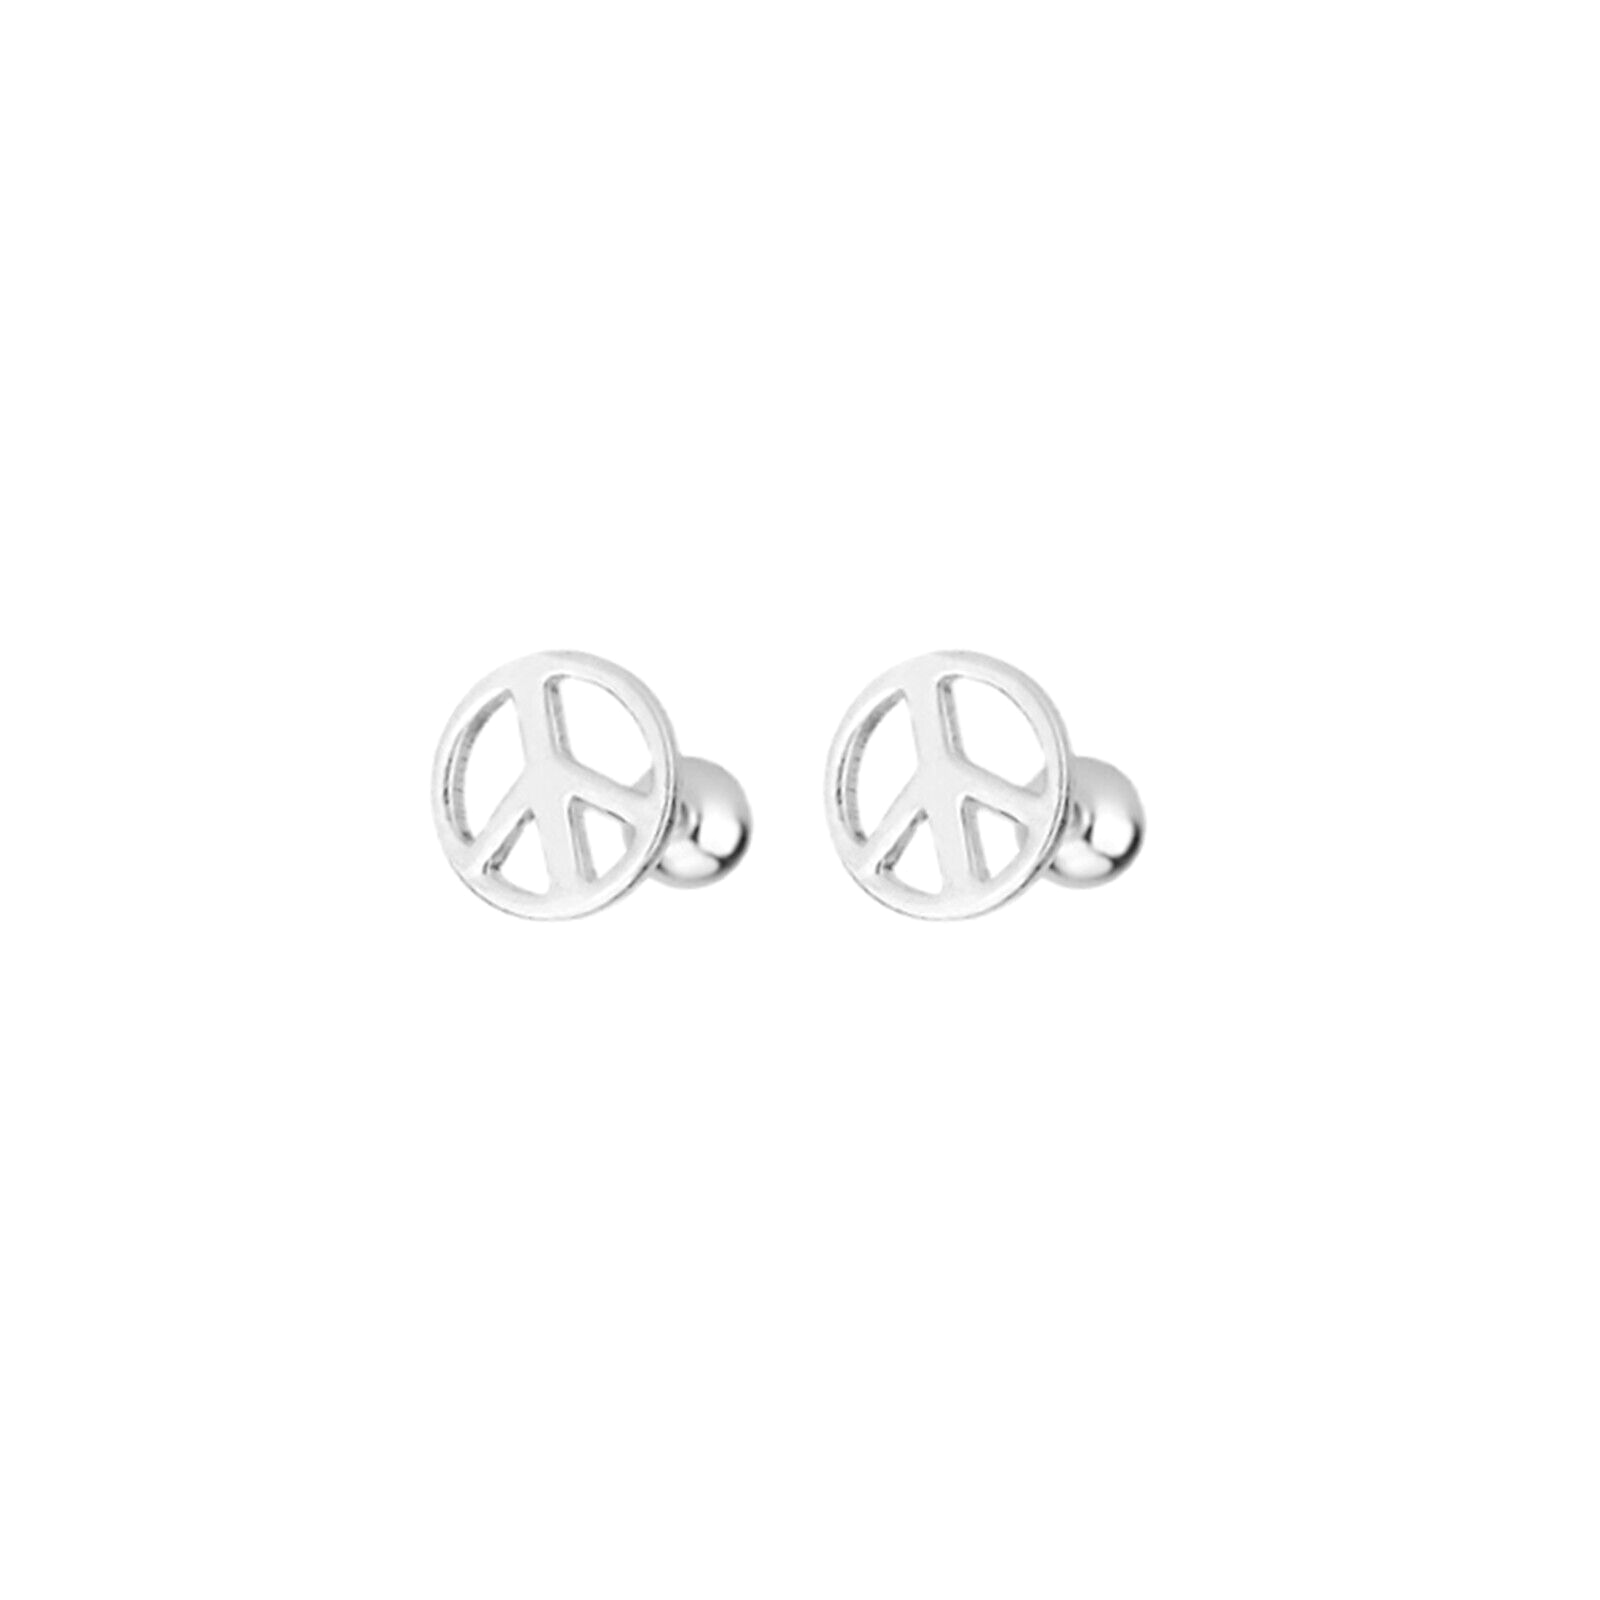 999 Silver Peace Sign Earrings | CND Symbol Barbell Beads on Screw Back Posts - sugarkittenlondon